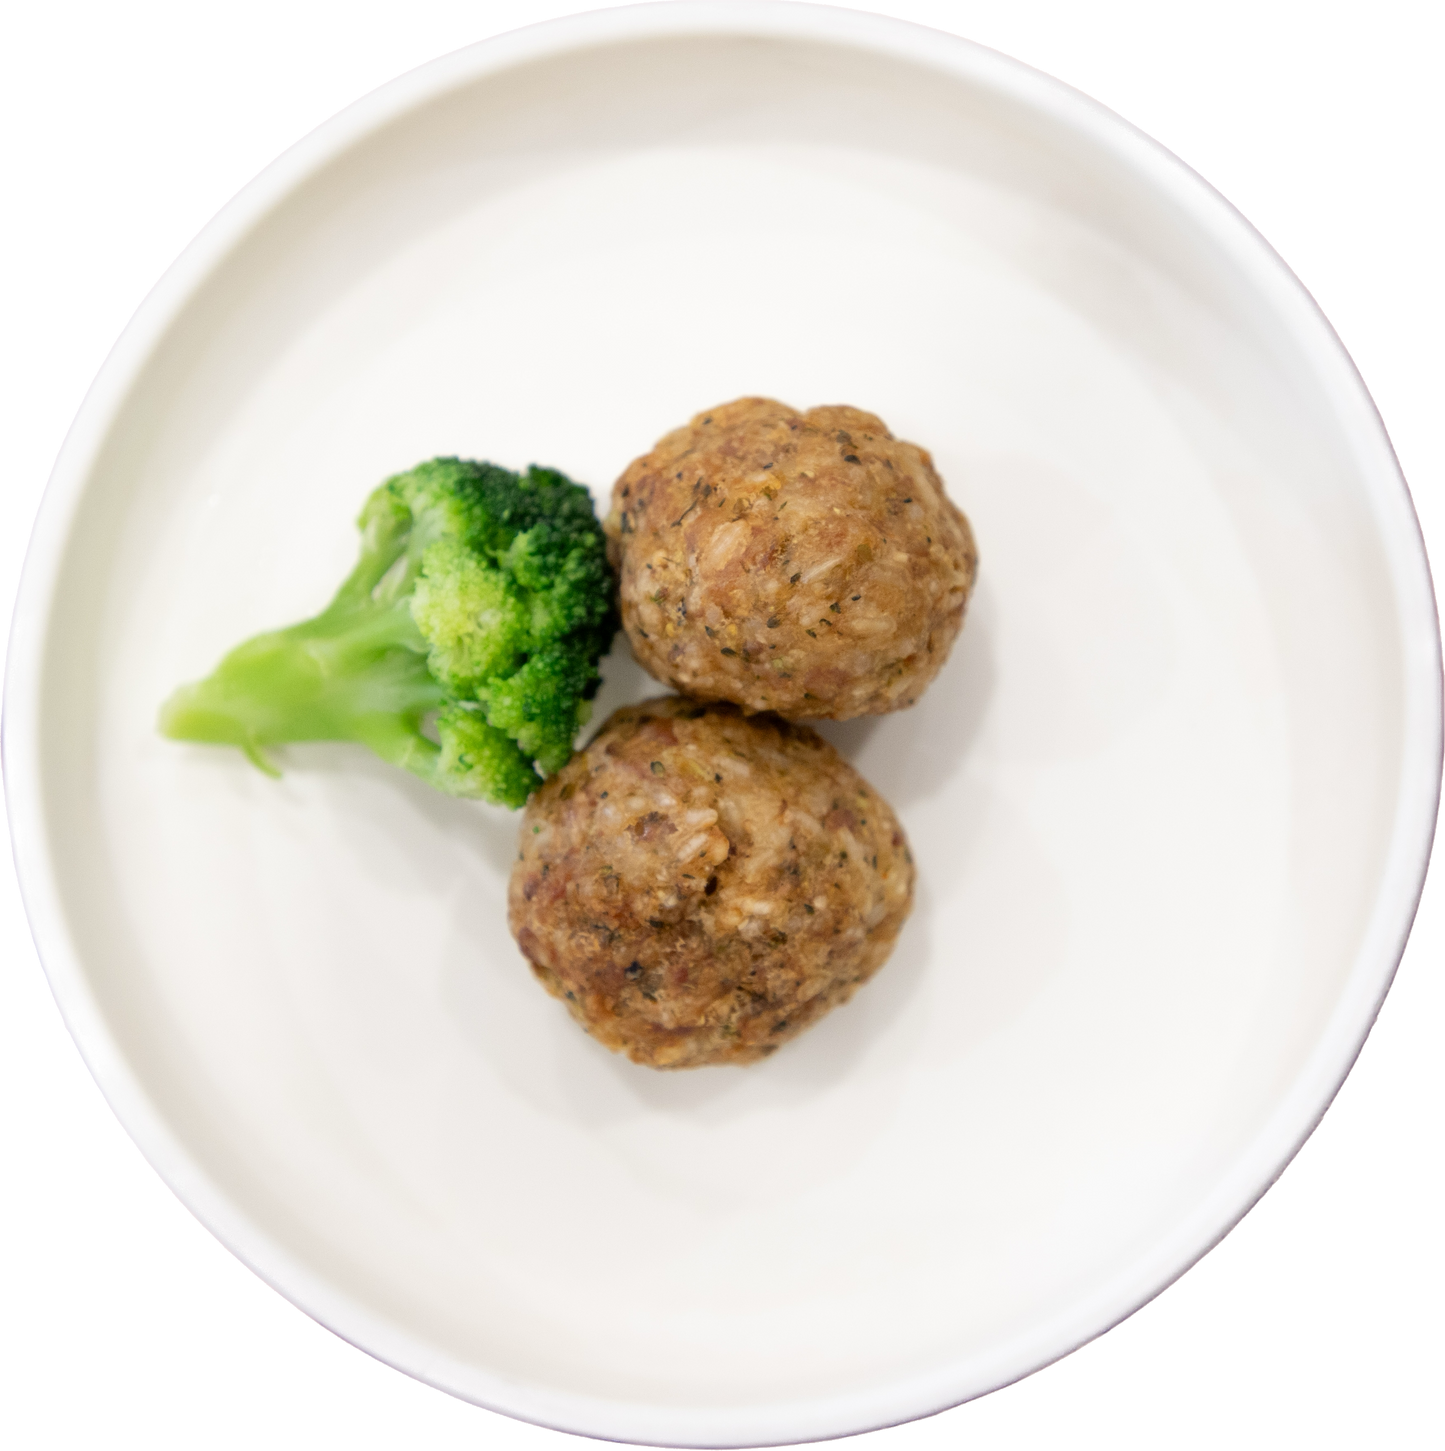 Sausage balls, rice and vegetables (pack of 4)